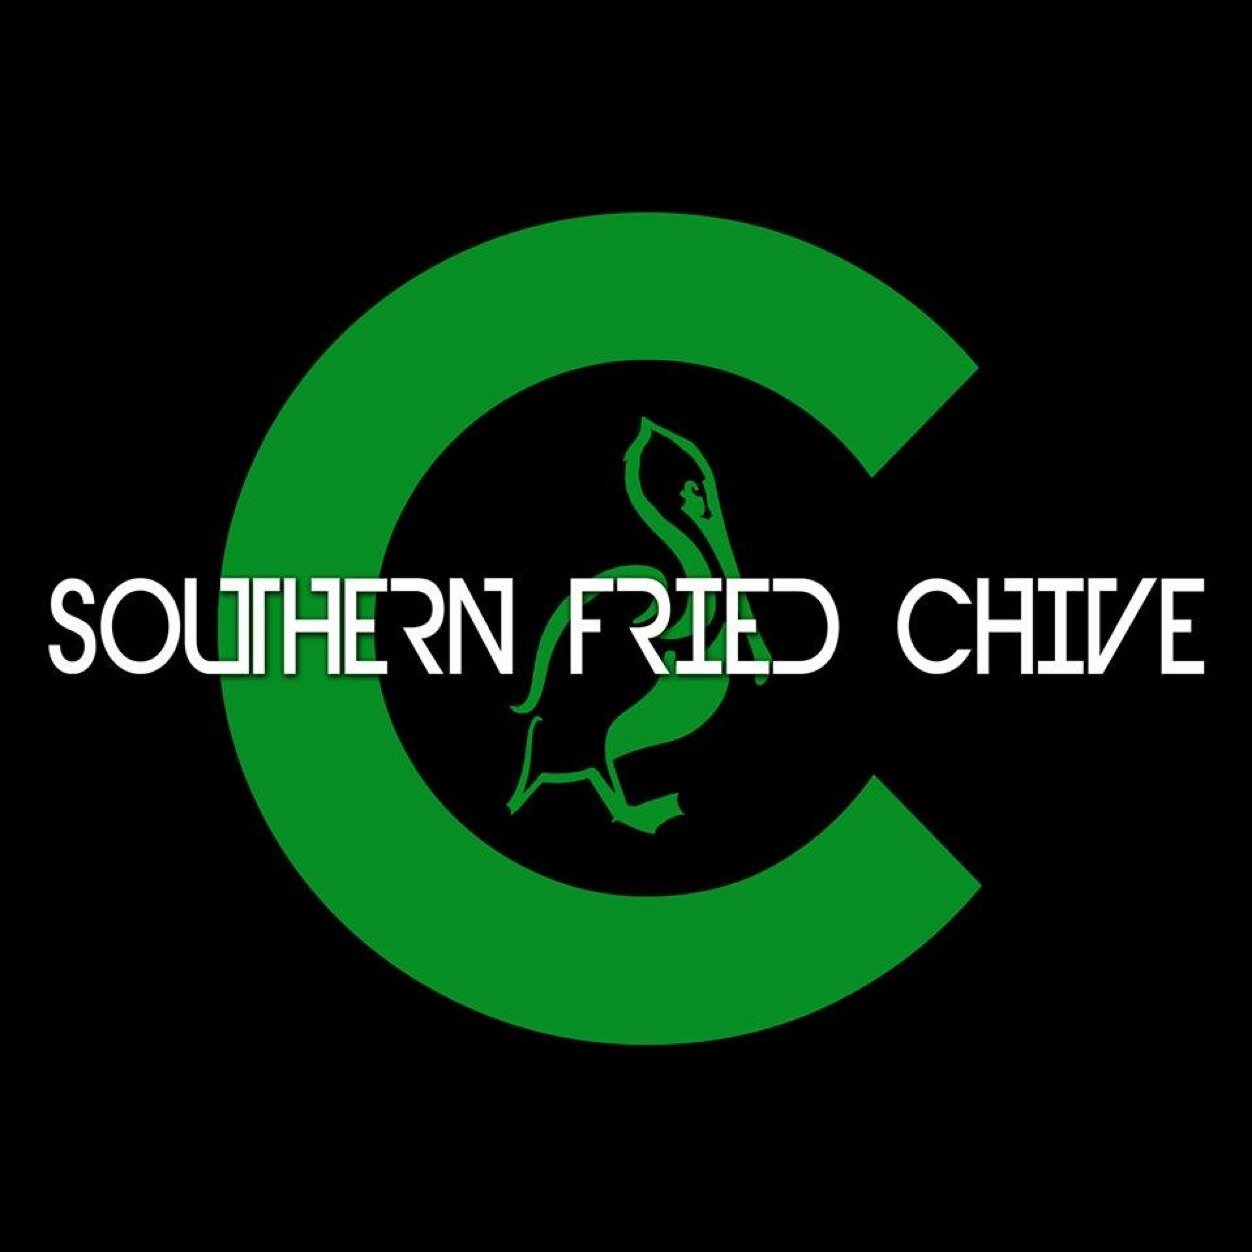 Chiving on in Southeast Louisiana with hope of bonding with as many chapters as possible to truly create one Chive Nation. KCCO